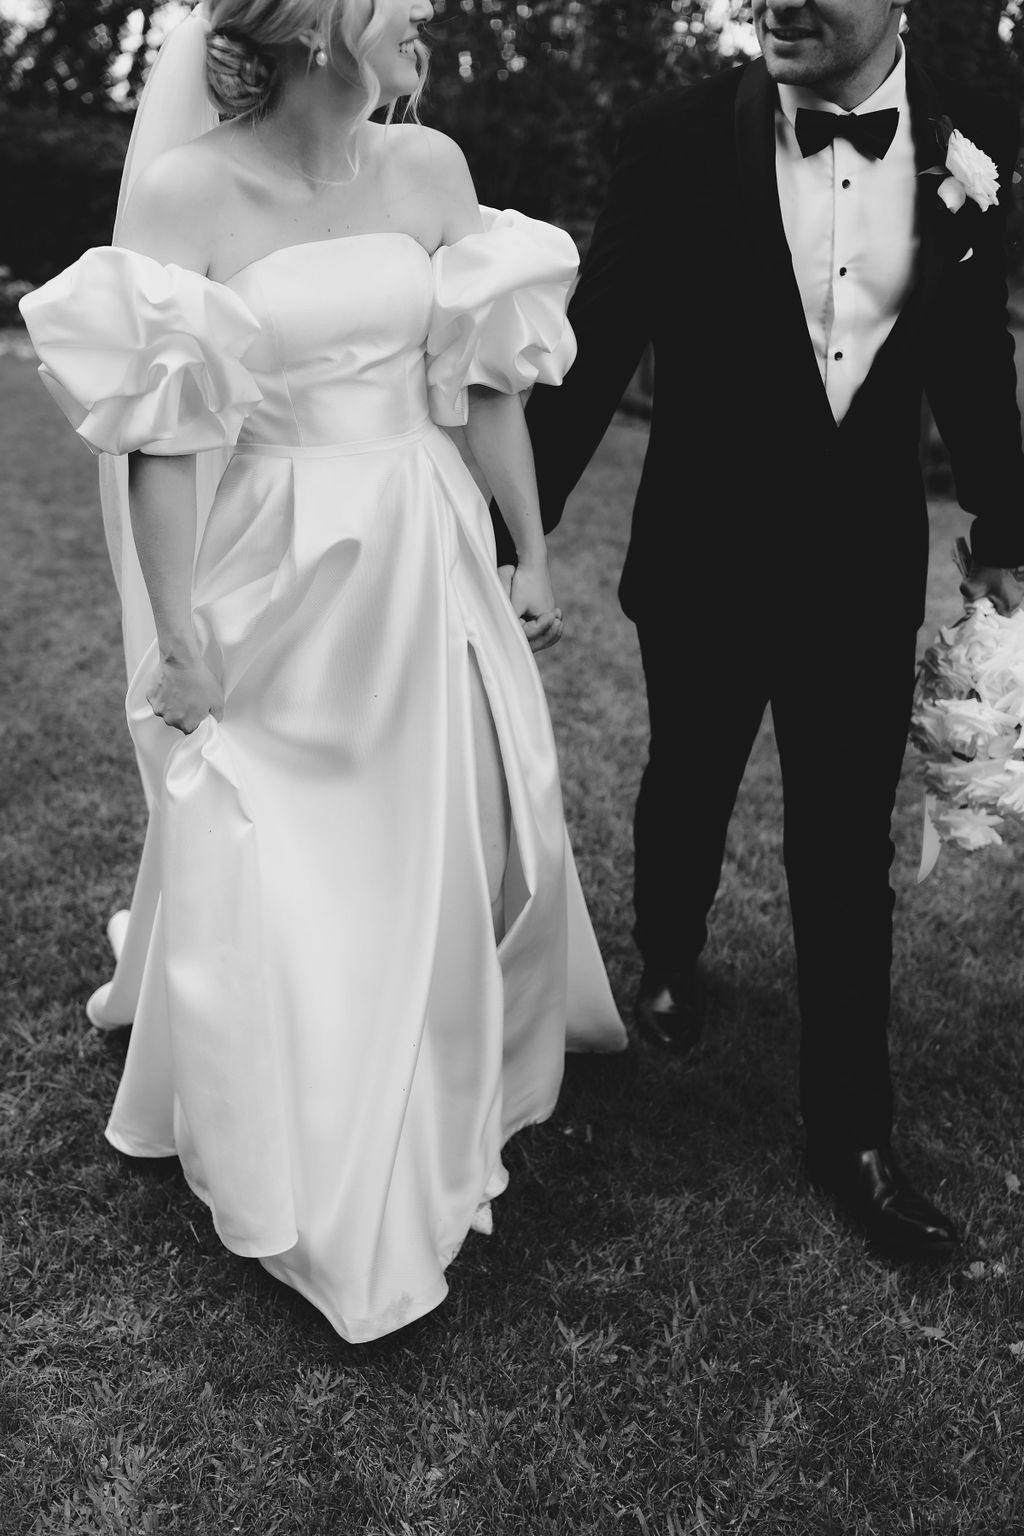 A black-and-white photo of a newlywed couple walking hand in hand on grass. The bride wears an off-shoulder wedding dress with puffy sleeves and holds her gown with one hand. The groom is in a tuxedo with a white shirt and bow tie, holding a bouquet in his other hand.